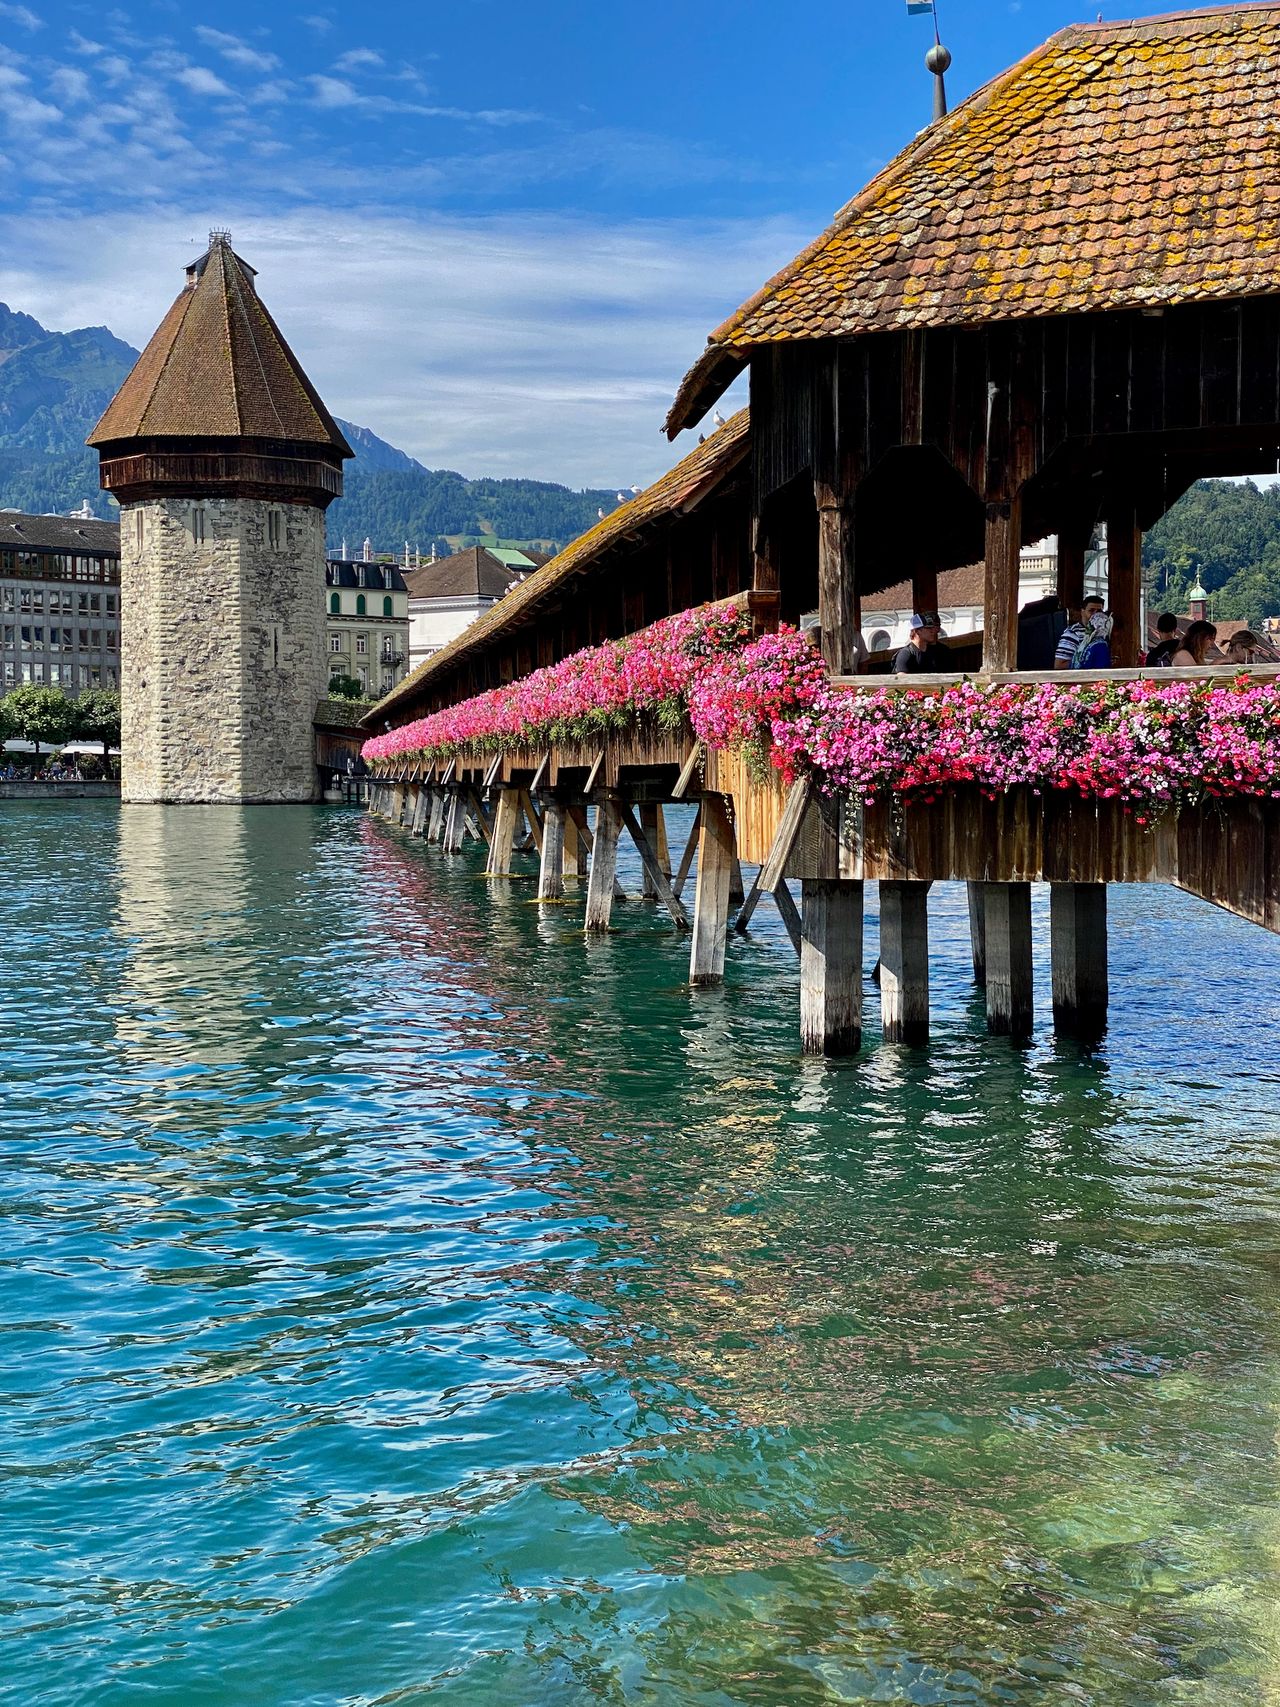 A tower and wooden bridge completely adorned with pink flowers along its entire length.